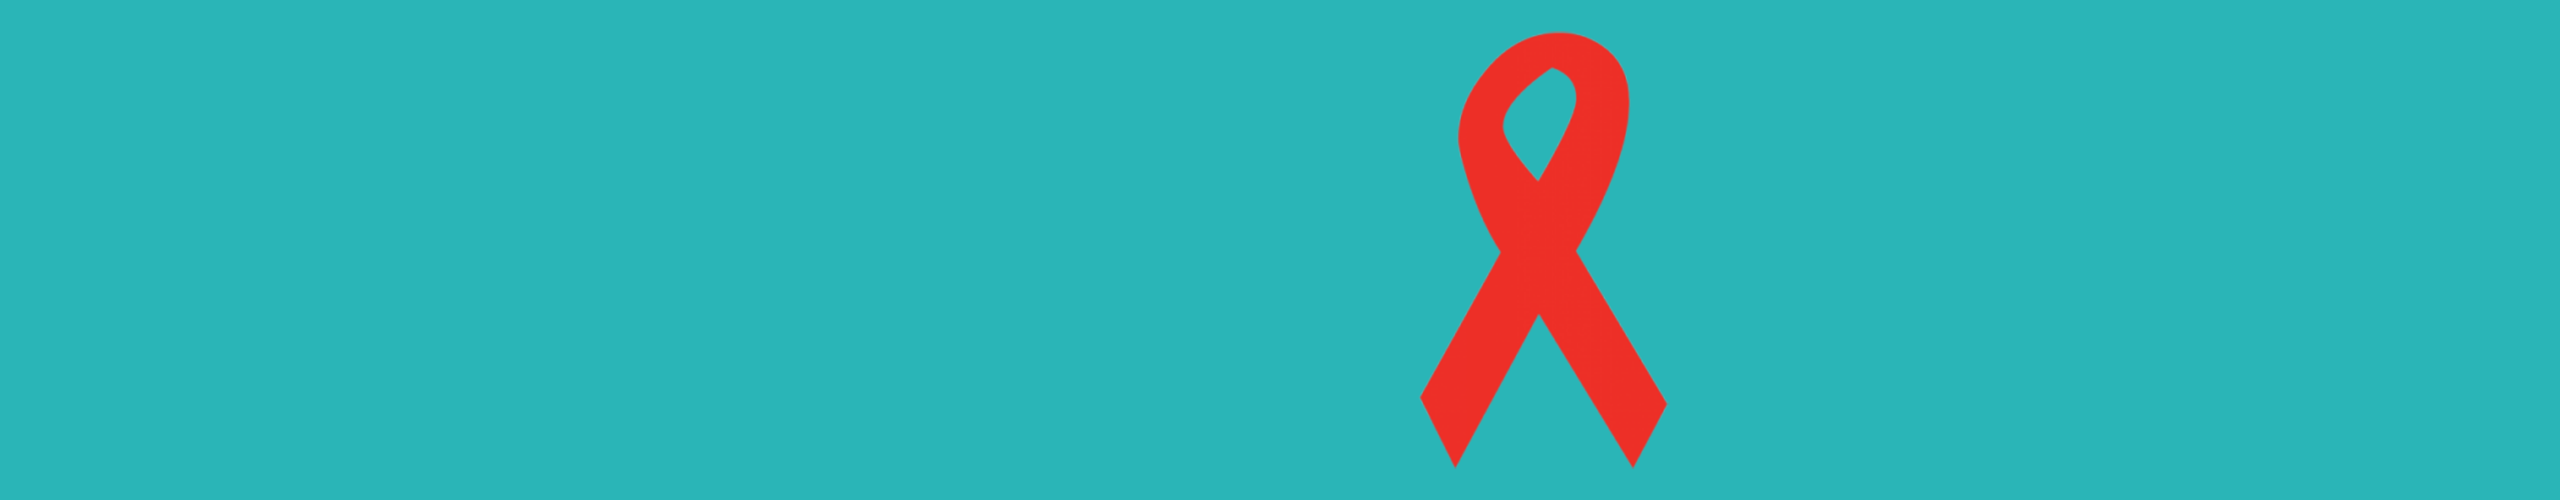 Red ribbon icon on green background